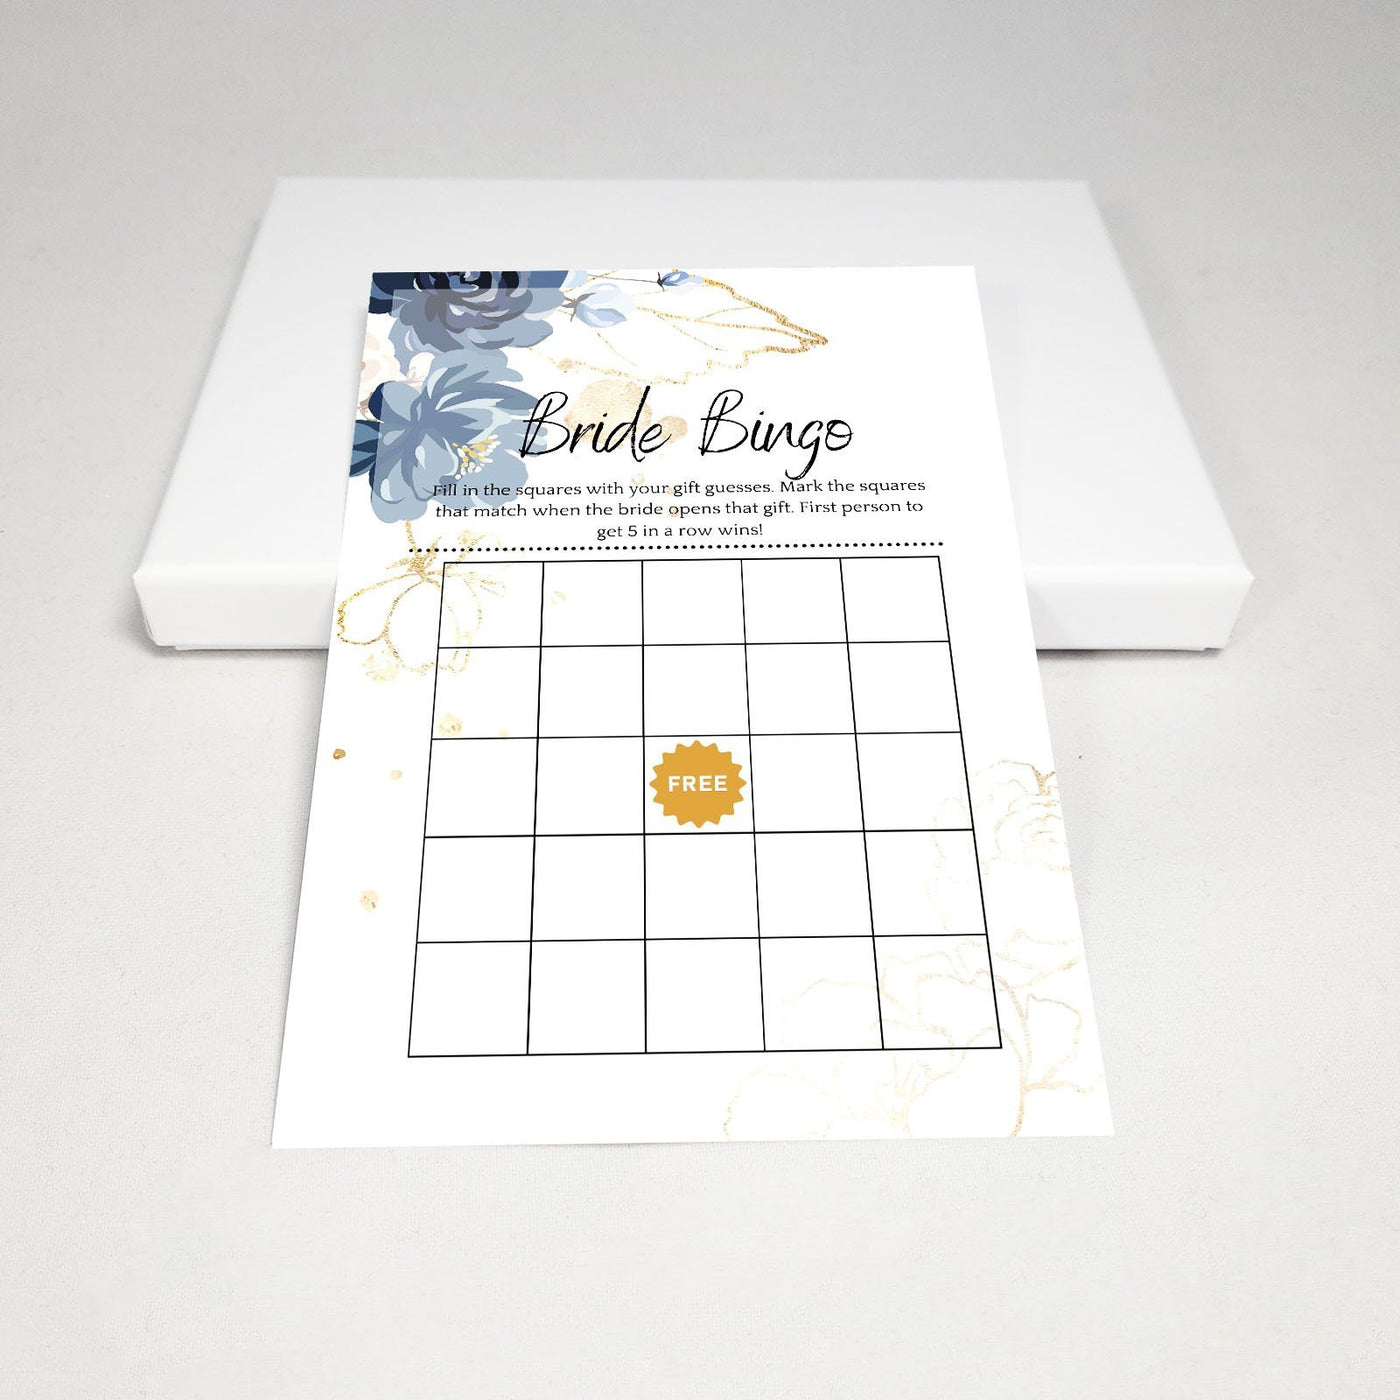 Deep Blue - Bridal Bingo | Bridal Shower Game Party Games Your Party Games 